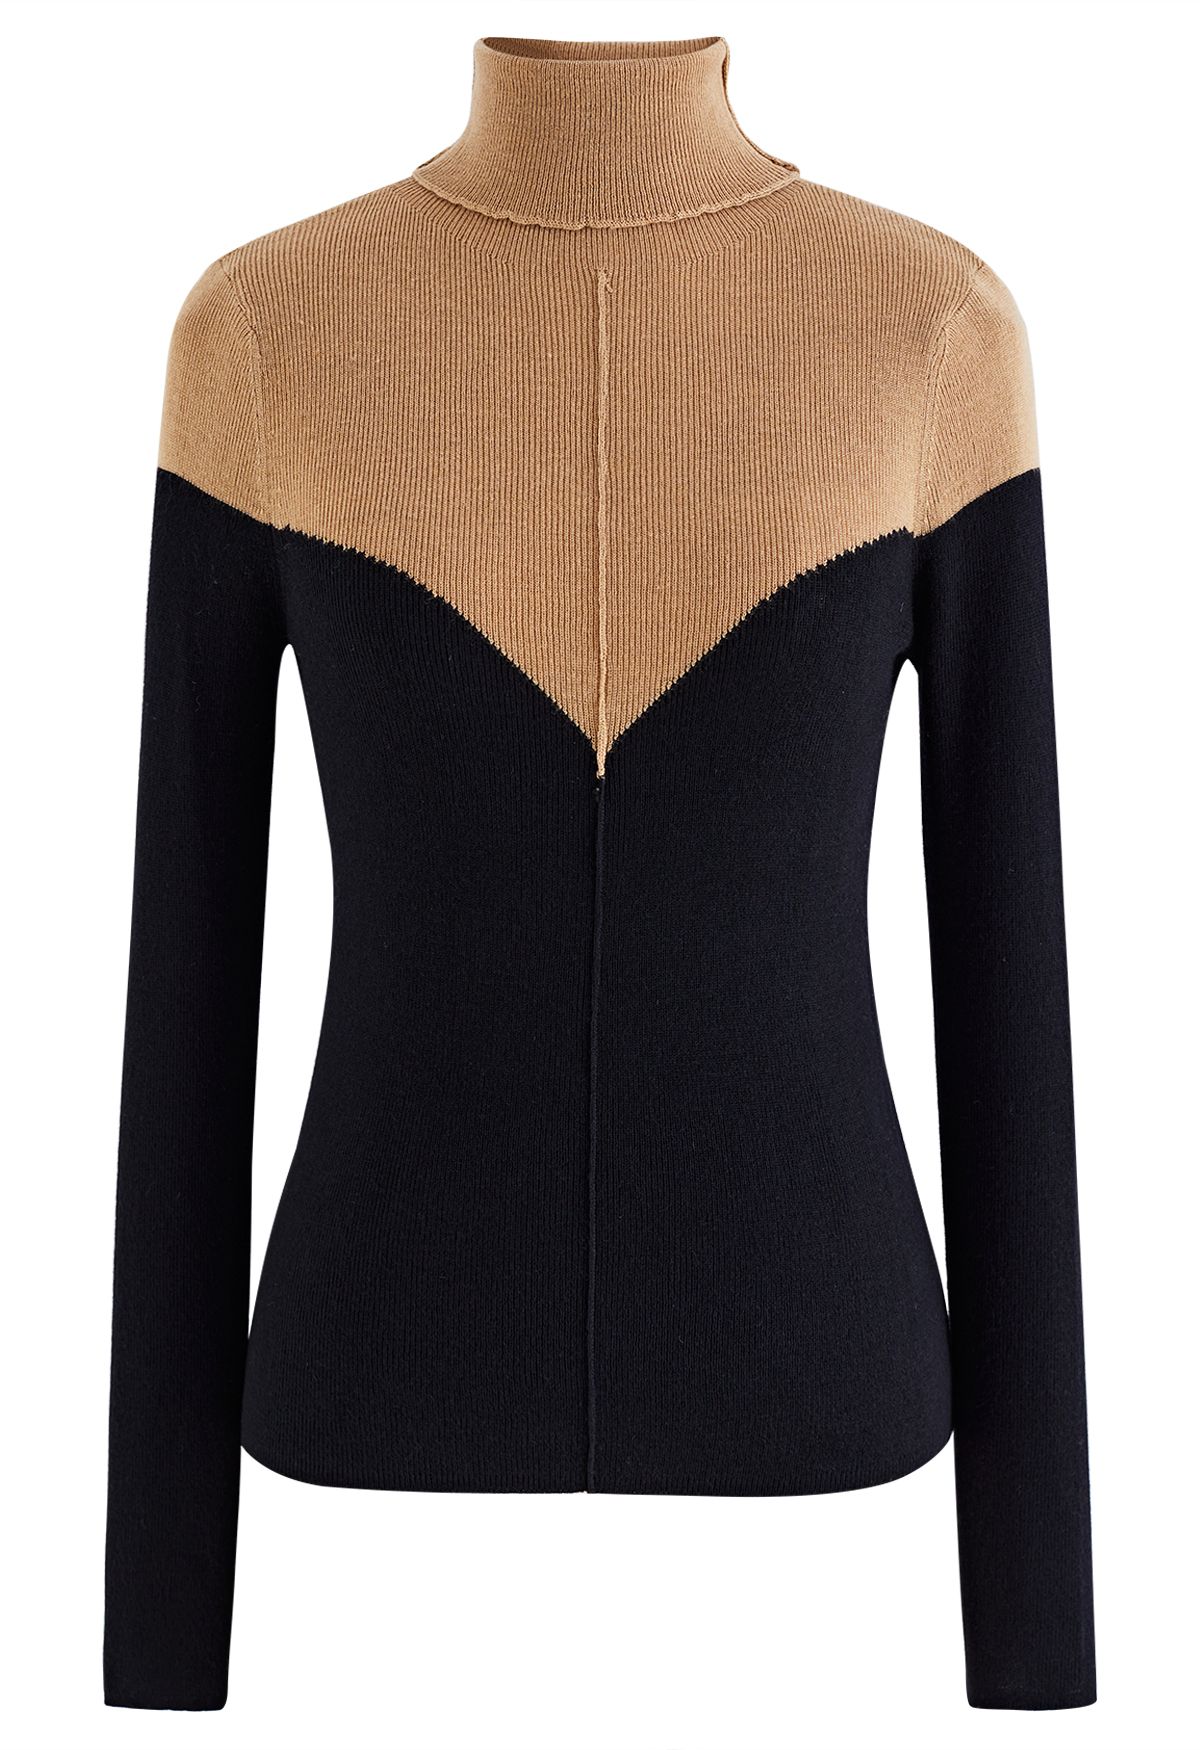 Turtleneck Two-Tone Fitted Knit Top in Black